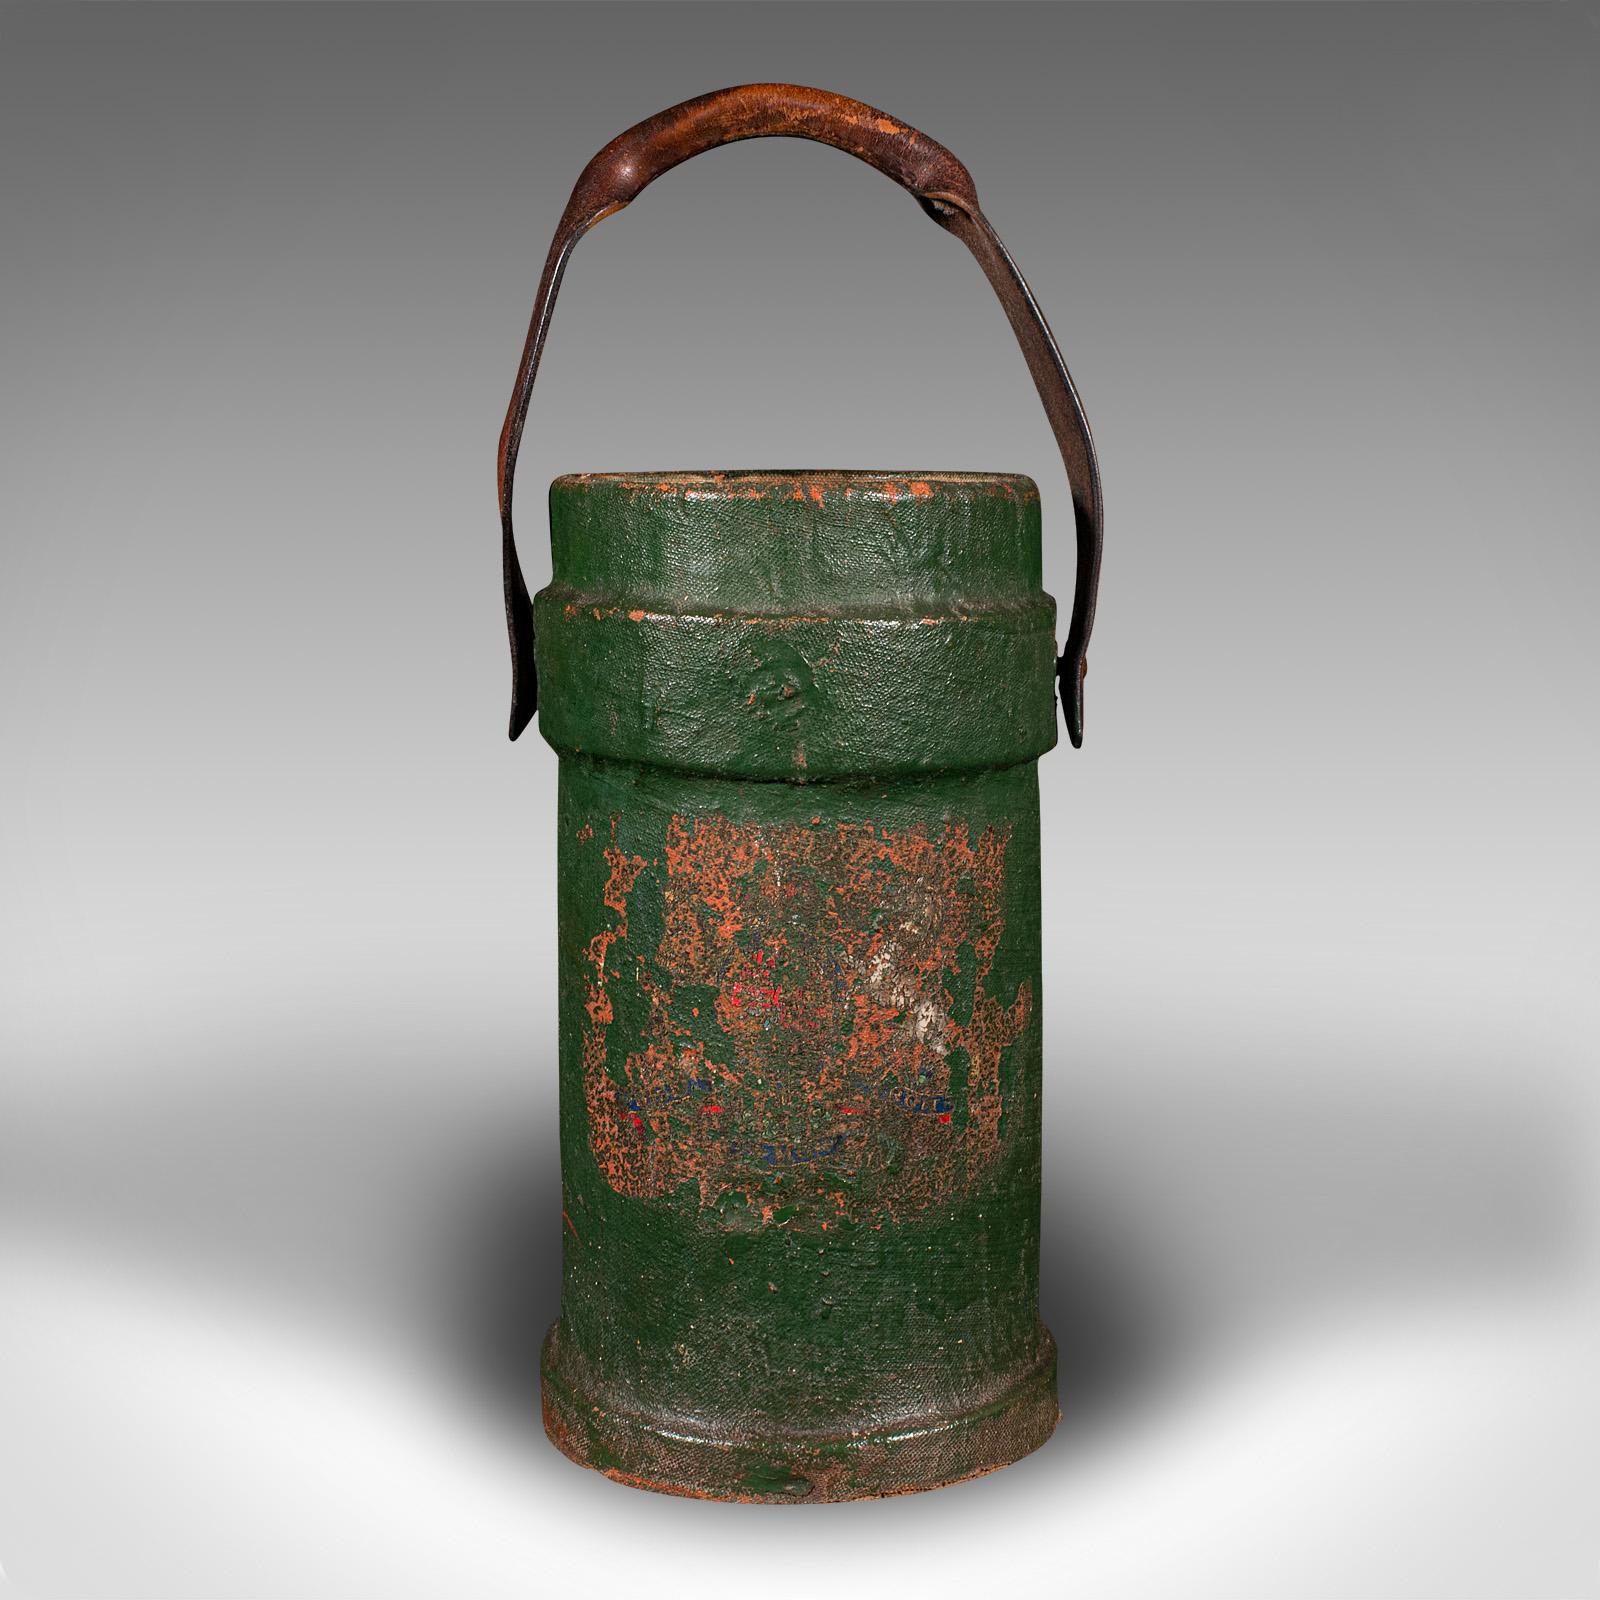 This is an antique household carry. An English, waxed canvas and leather log or storage bucket, dating to the late Victorian period, circa 1900.

Distinctive weathered appearance, and of versatile form
Displays a desirably aged, original patina